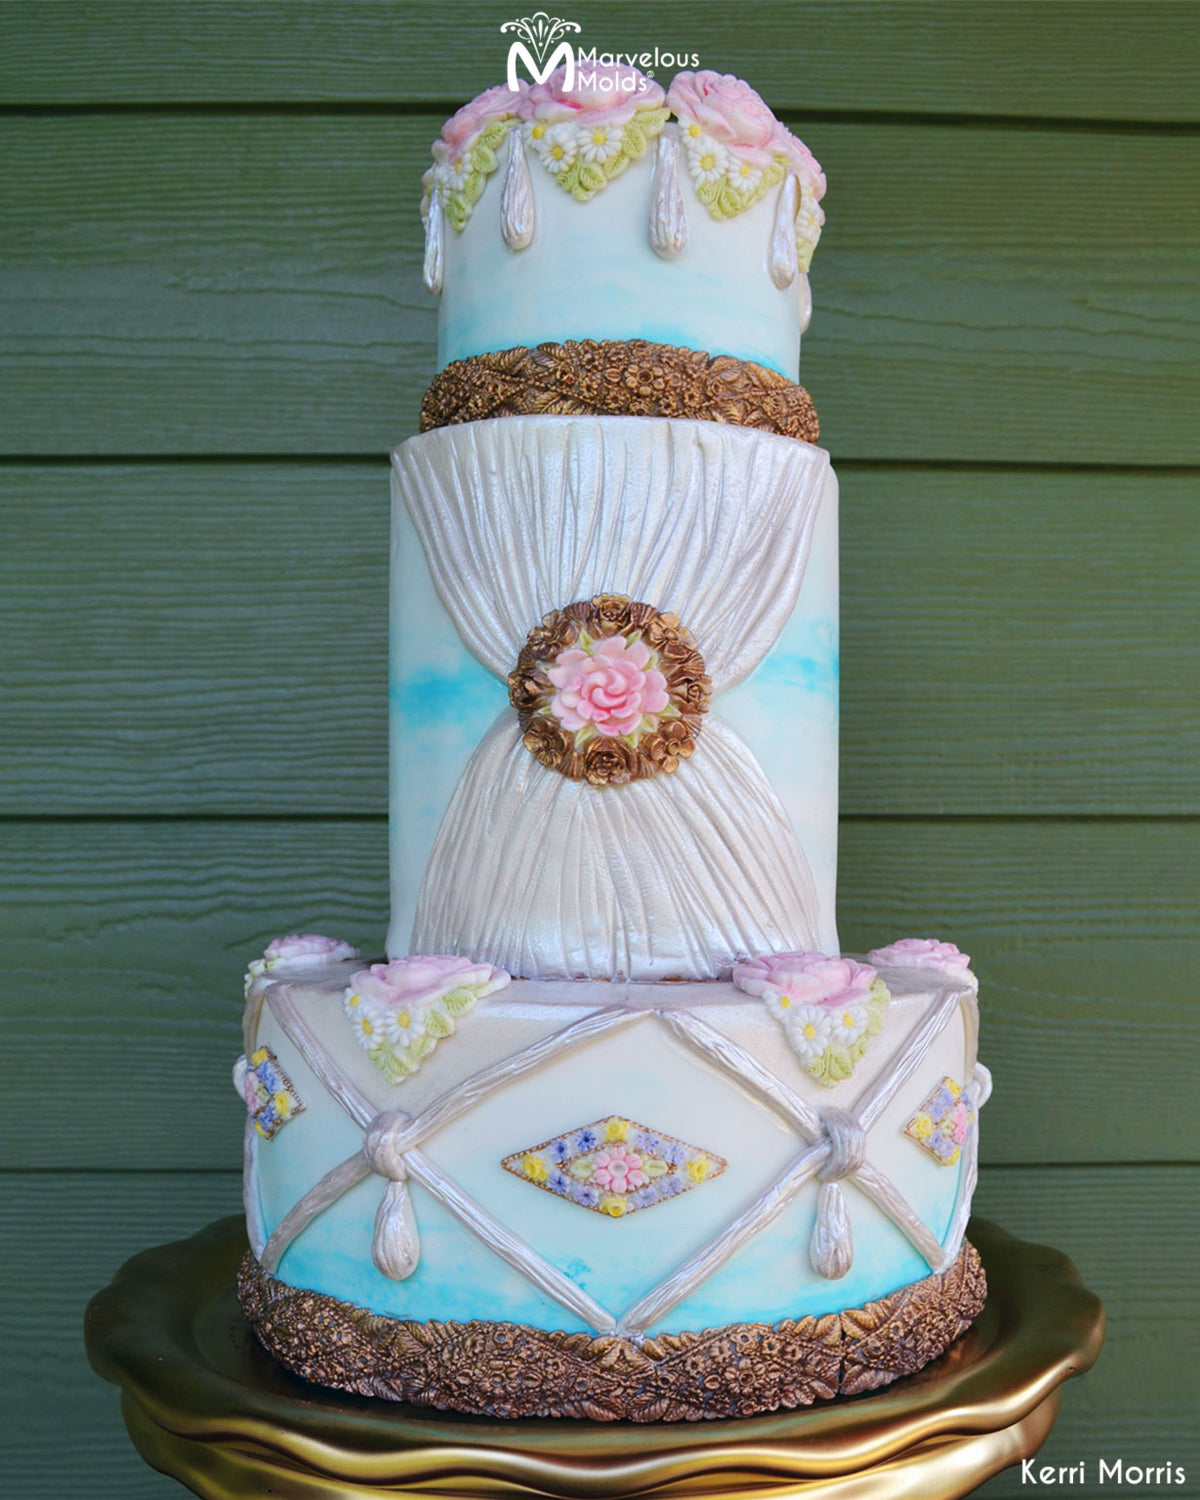 Rainbow Sherbet Cake Decorated Using the Serenade Medallion Mold by Marvelous Molds